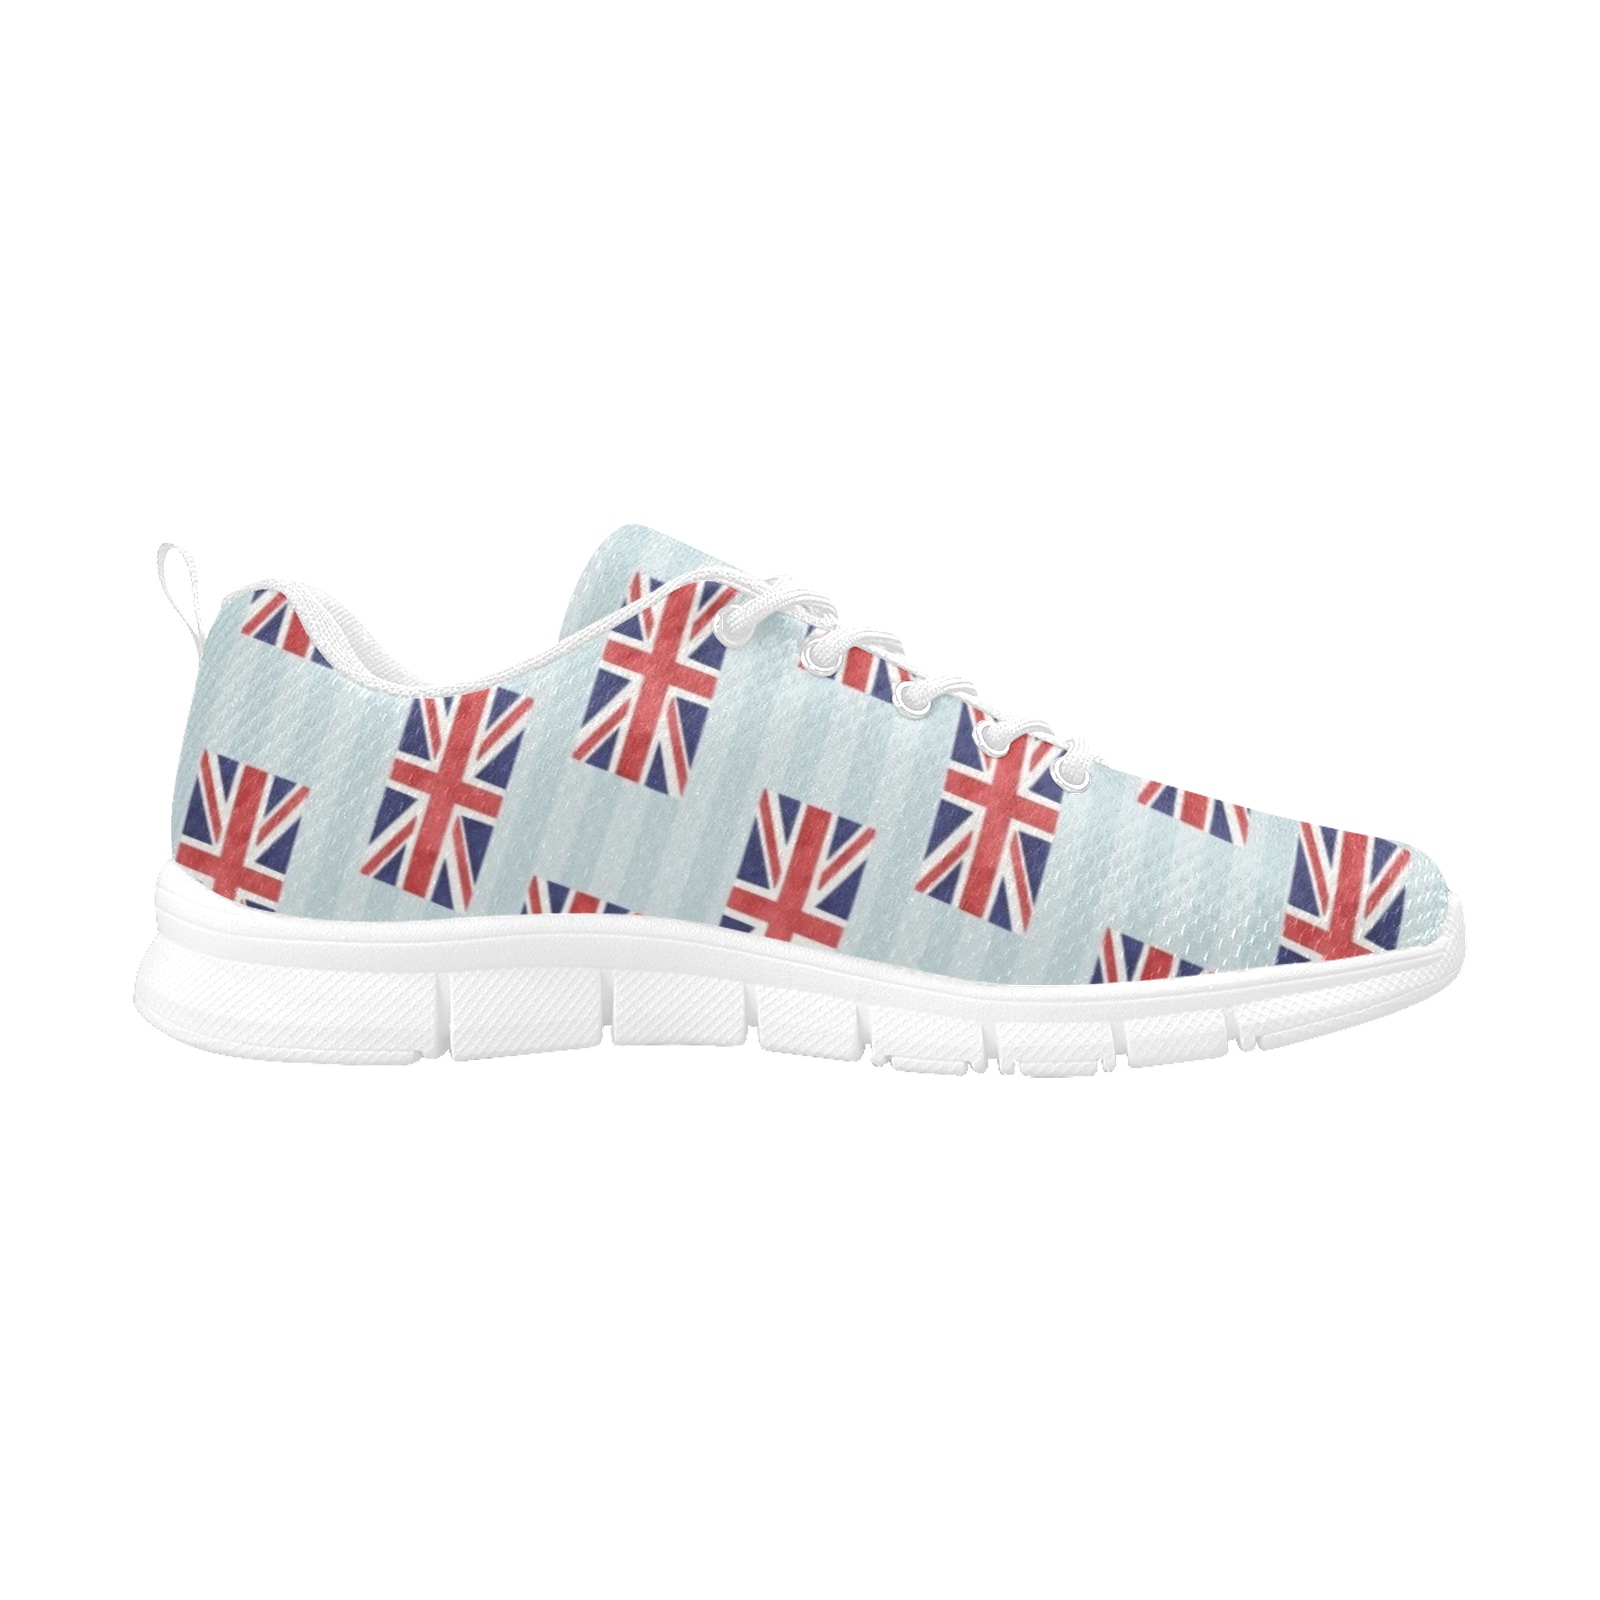 Union Jack - Blue Women's Breathable Running Shoes (Model 055)